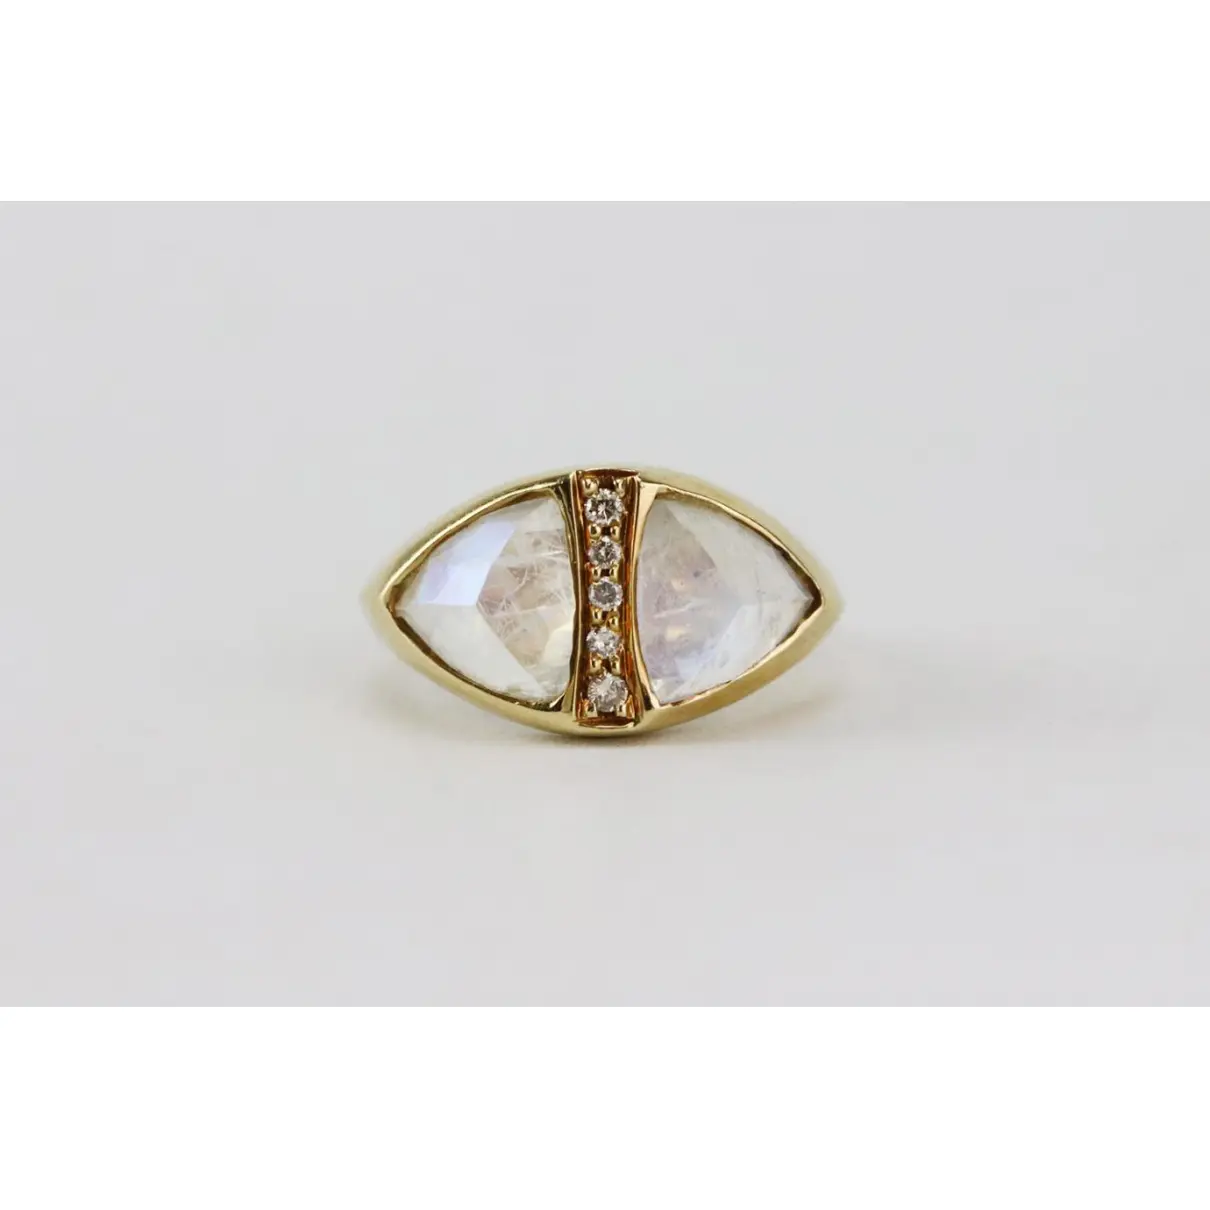 Buy Jacquie Aiche Yellow gold ring online